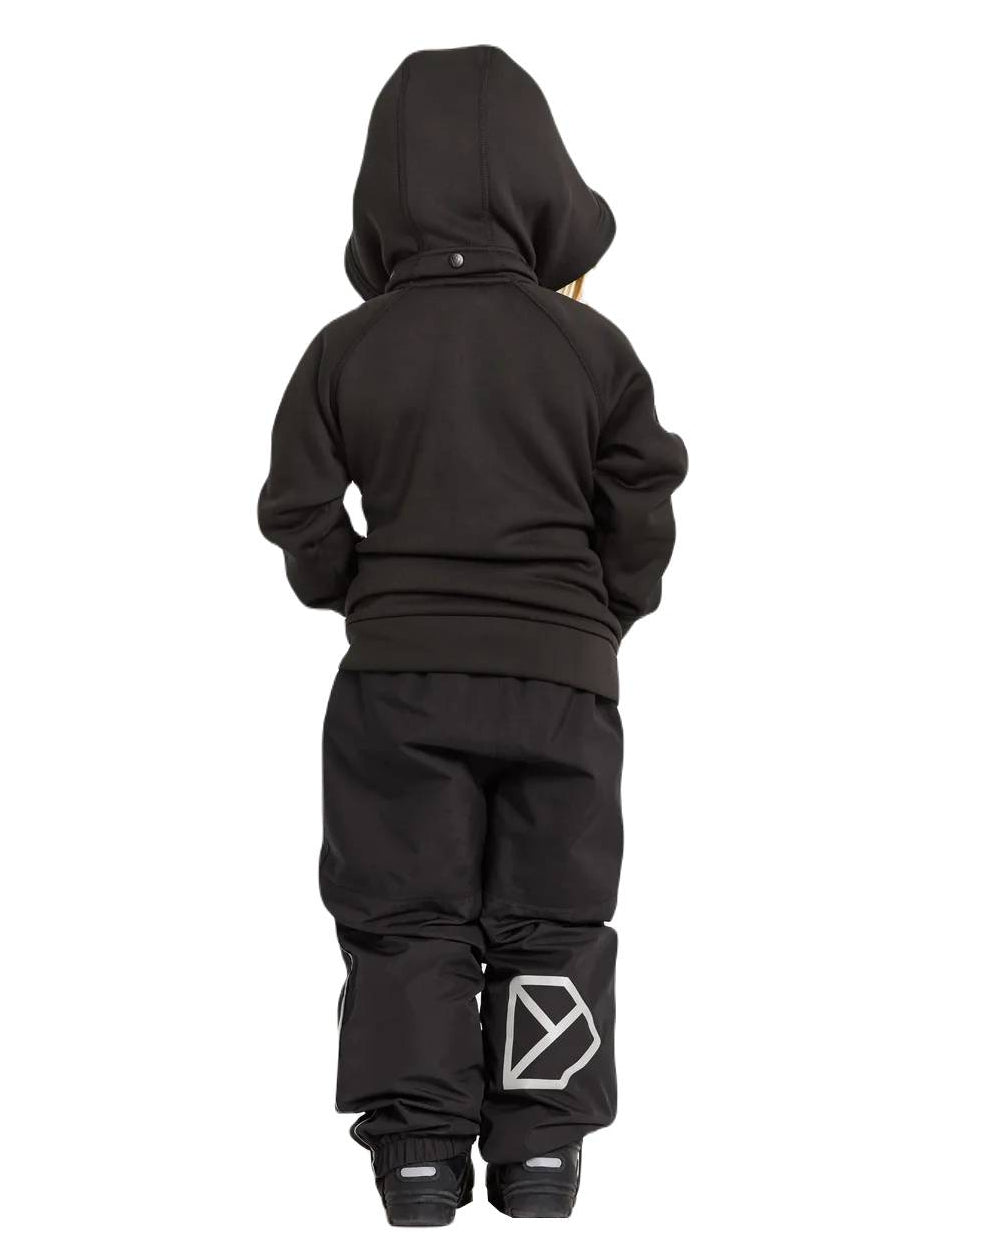 Black Coloured Didriksons Narvi Childrens Pant On A White Background 